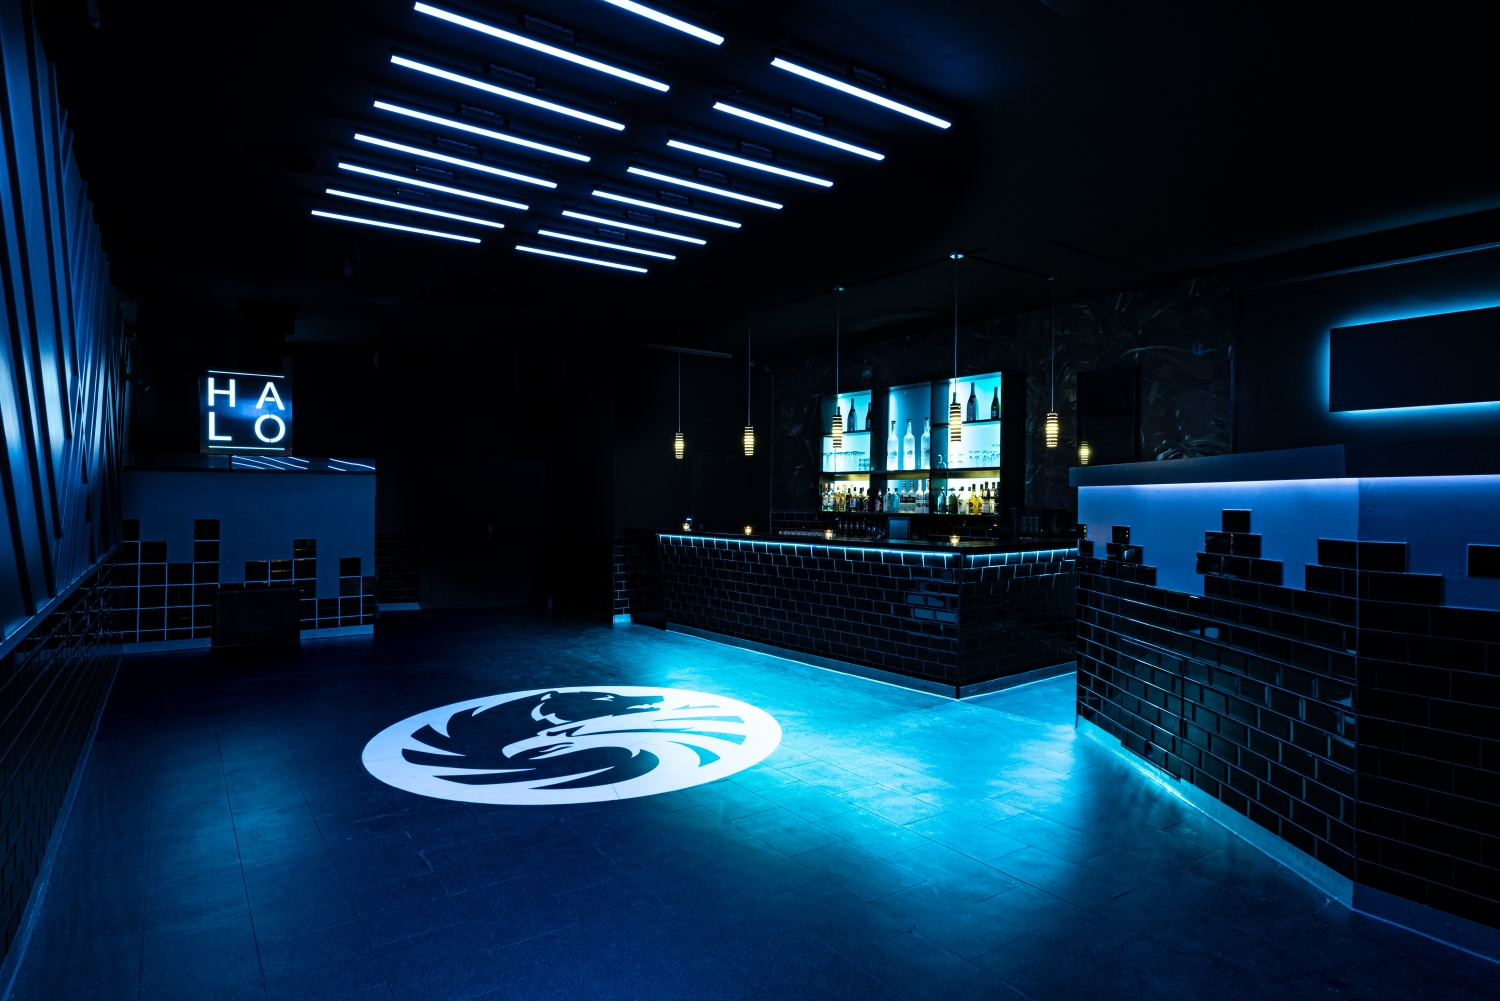 UPPER HALO Bar and Dancefloor with urban design elements such as bricks and some nice contemporary patterns on the walls add nice detail to the hip-hop area.